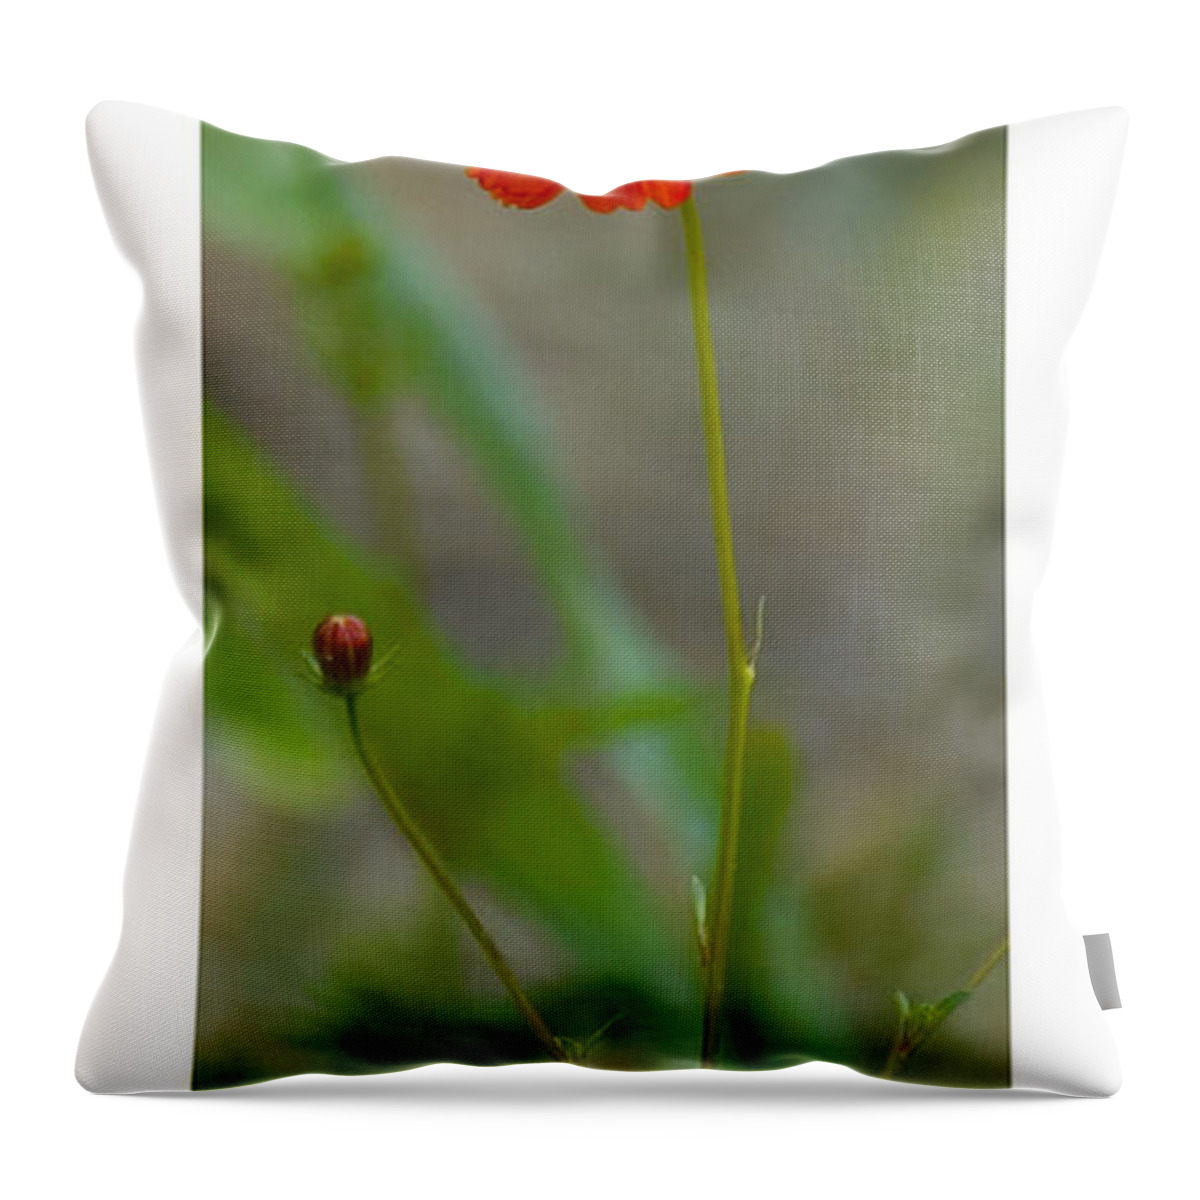  Throw Pillow featuring the photograph Still Life in Madrid by R Thomas Berner